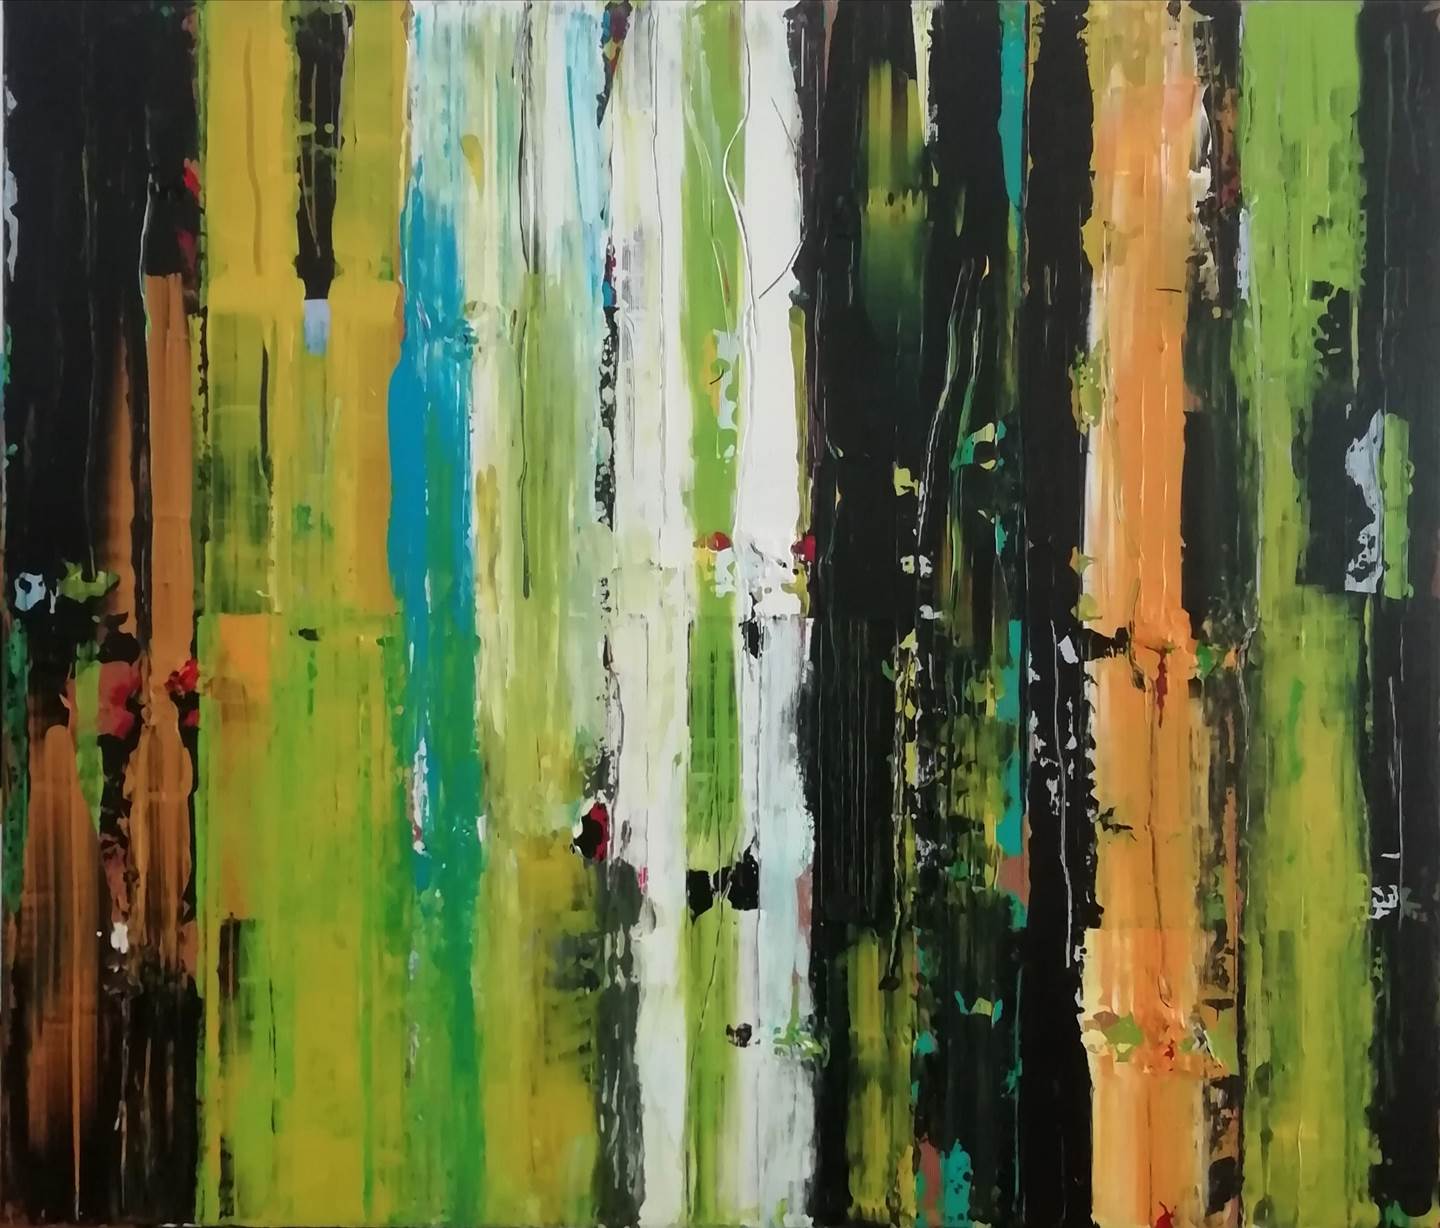 The sounds of silence, original Abstract Acrylic Painting by Francisco Santos